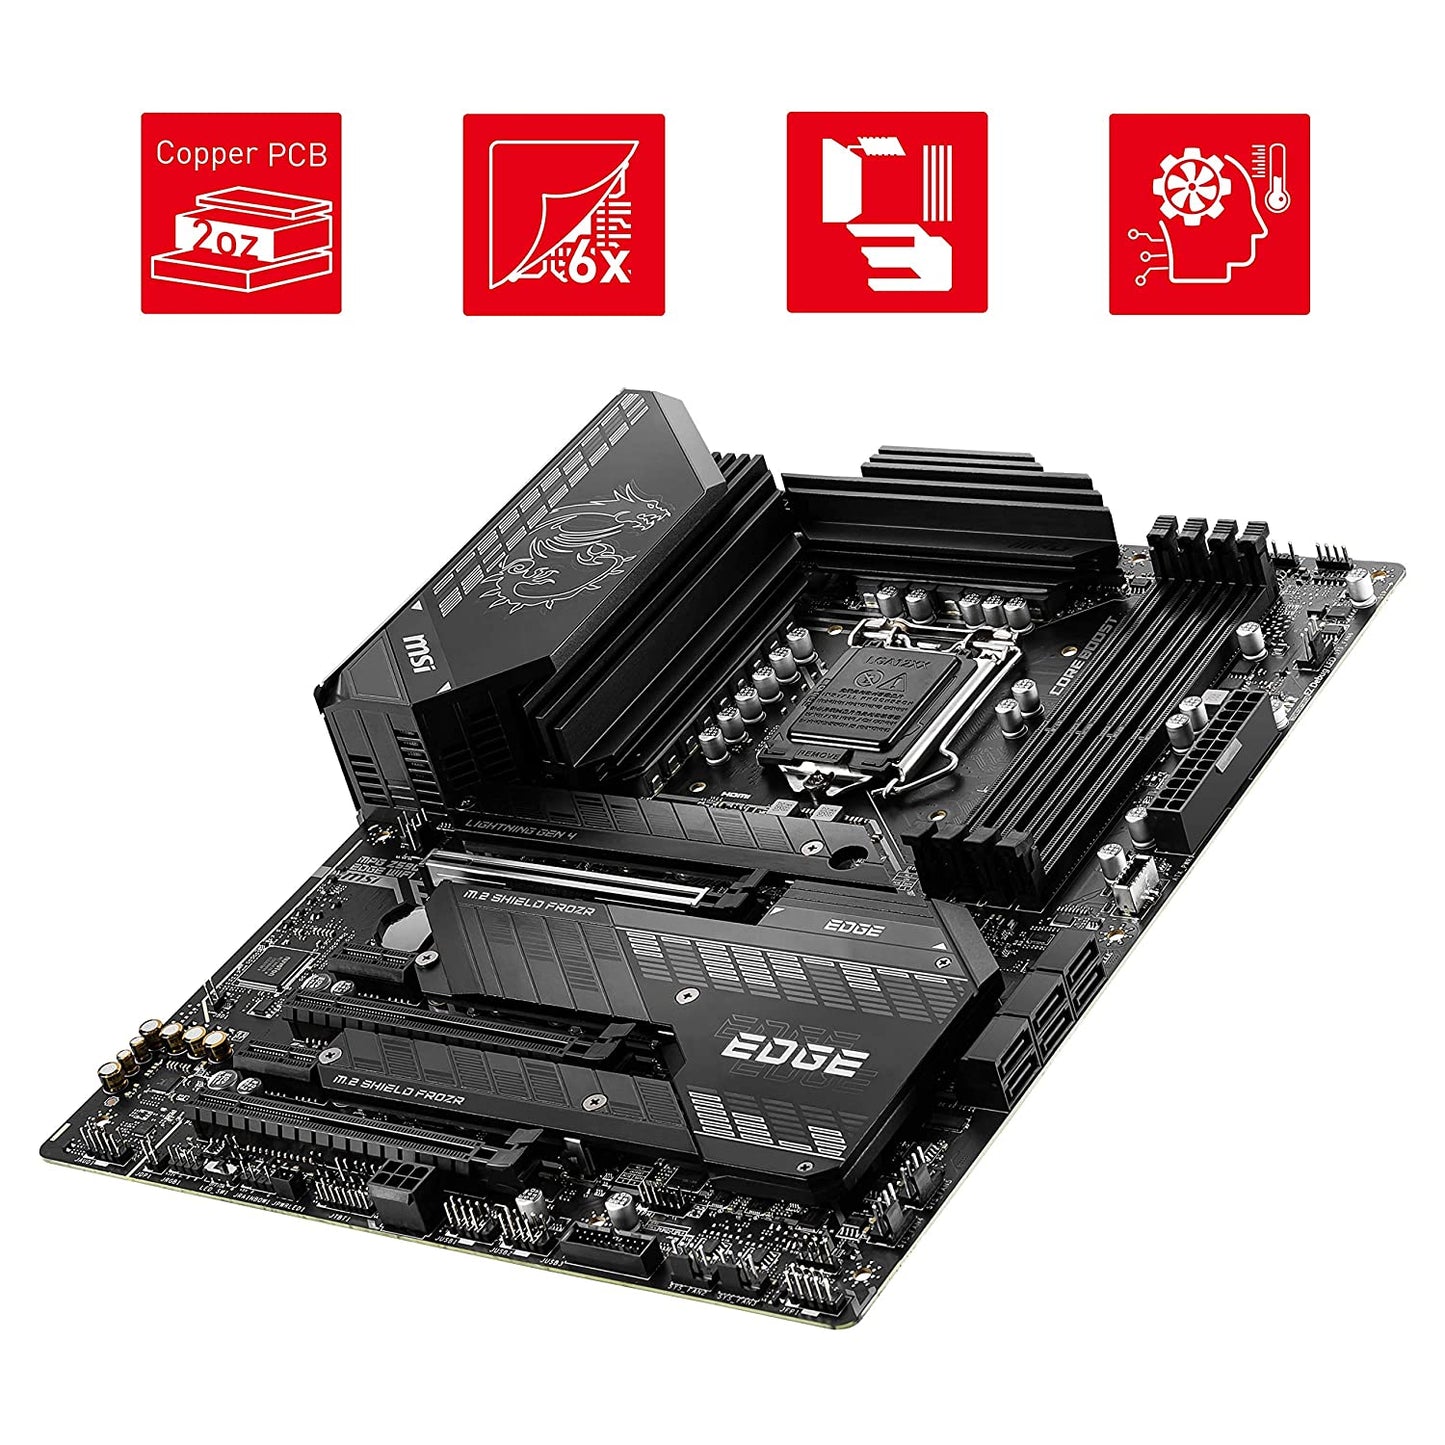 MSI MPG Z590 Gaming Edge WiFi Motherboard ATX - Supports Intel Core 11th Gen Processors